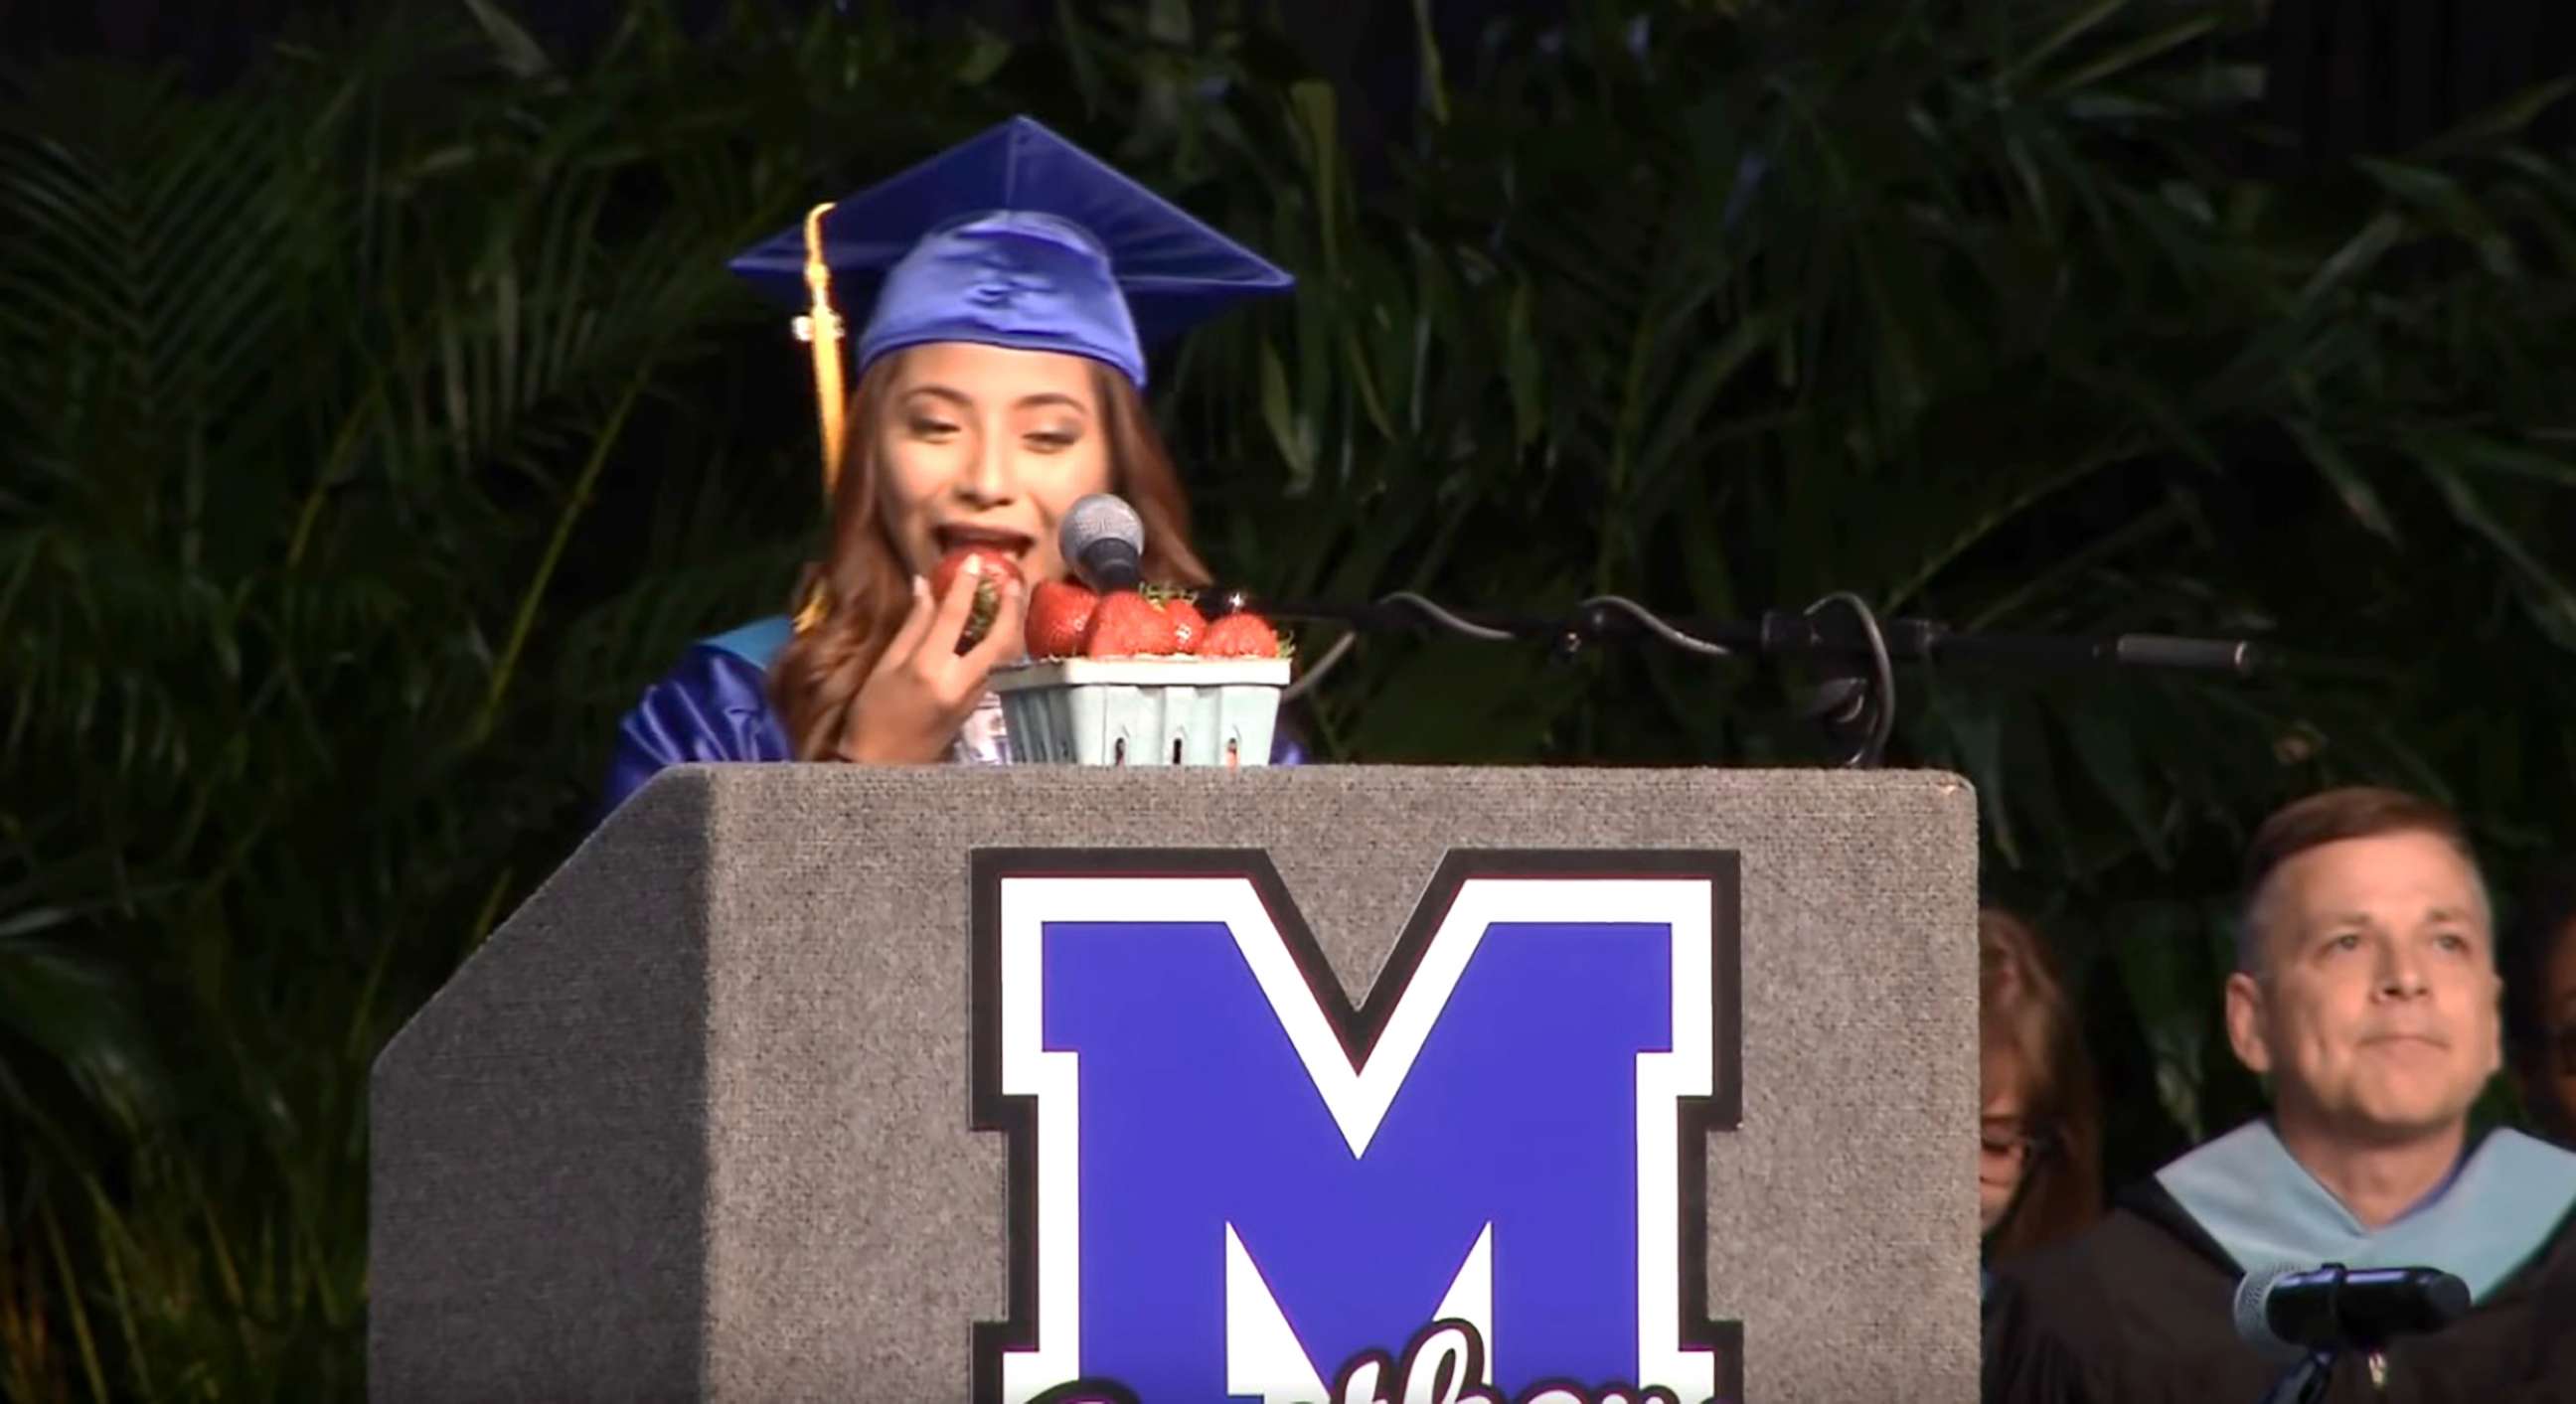 PHOTO: Brenda Alvarez-Lagunas, 18, thanks her immigrant parents during her valedictorian speech at at Mulberry High School in Mulberry, Fla., on May 24, 2019.